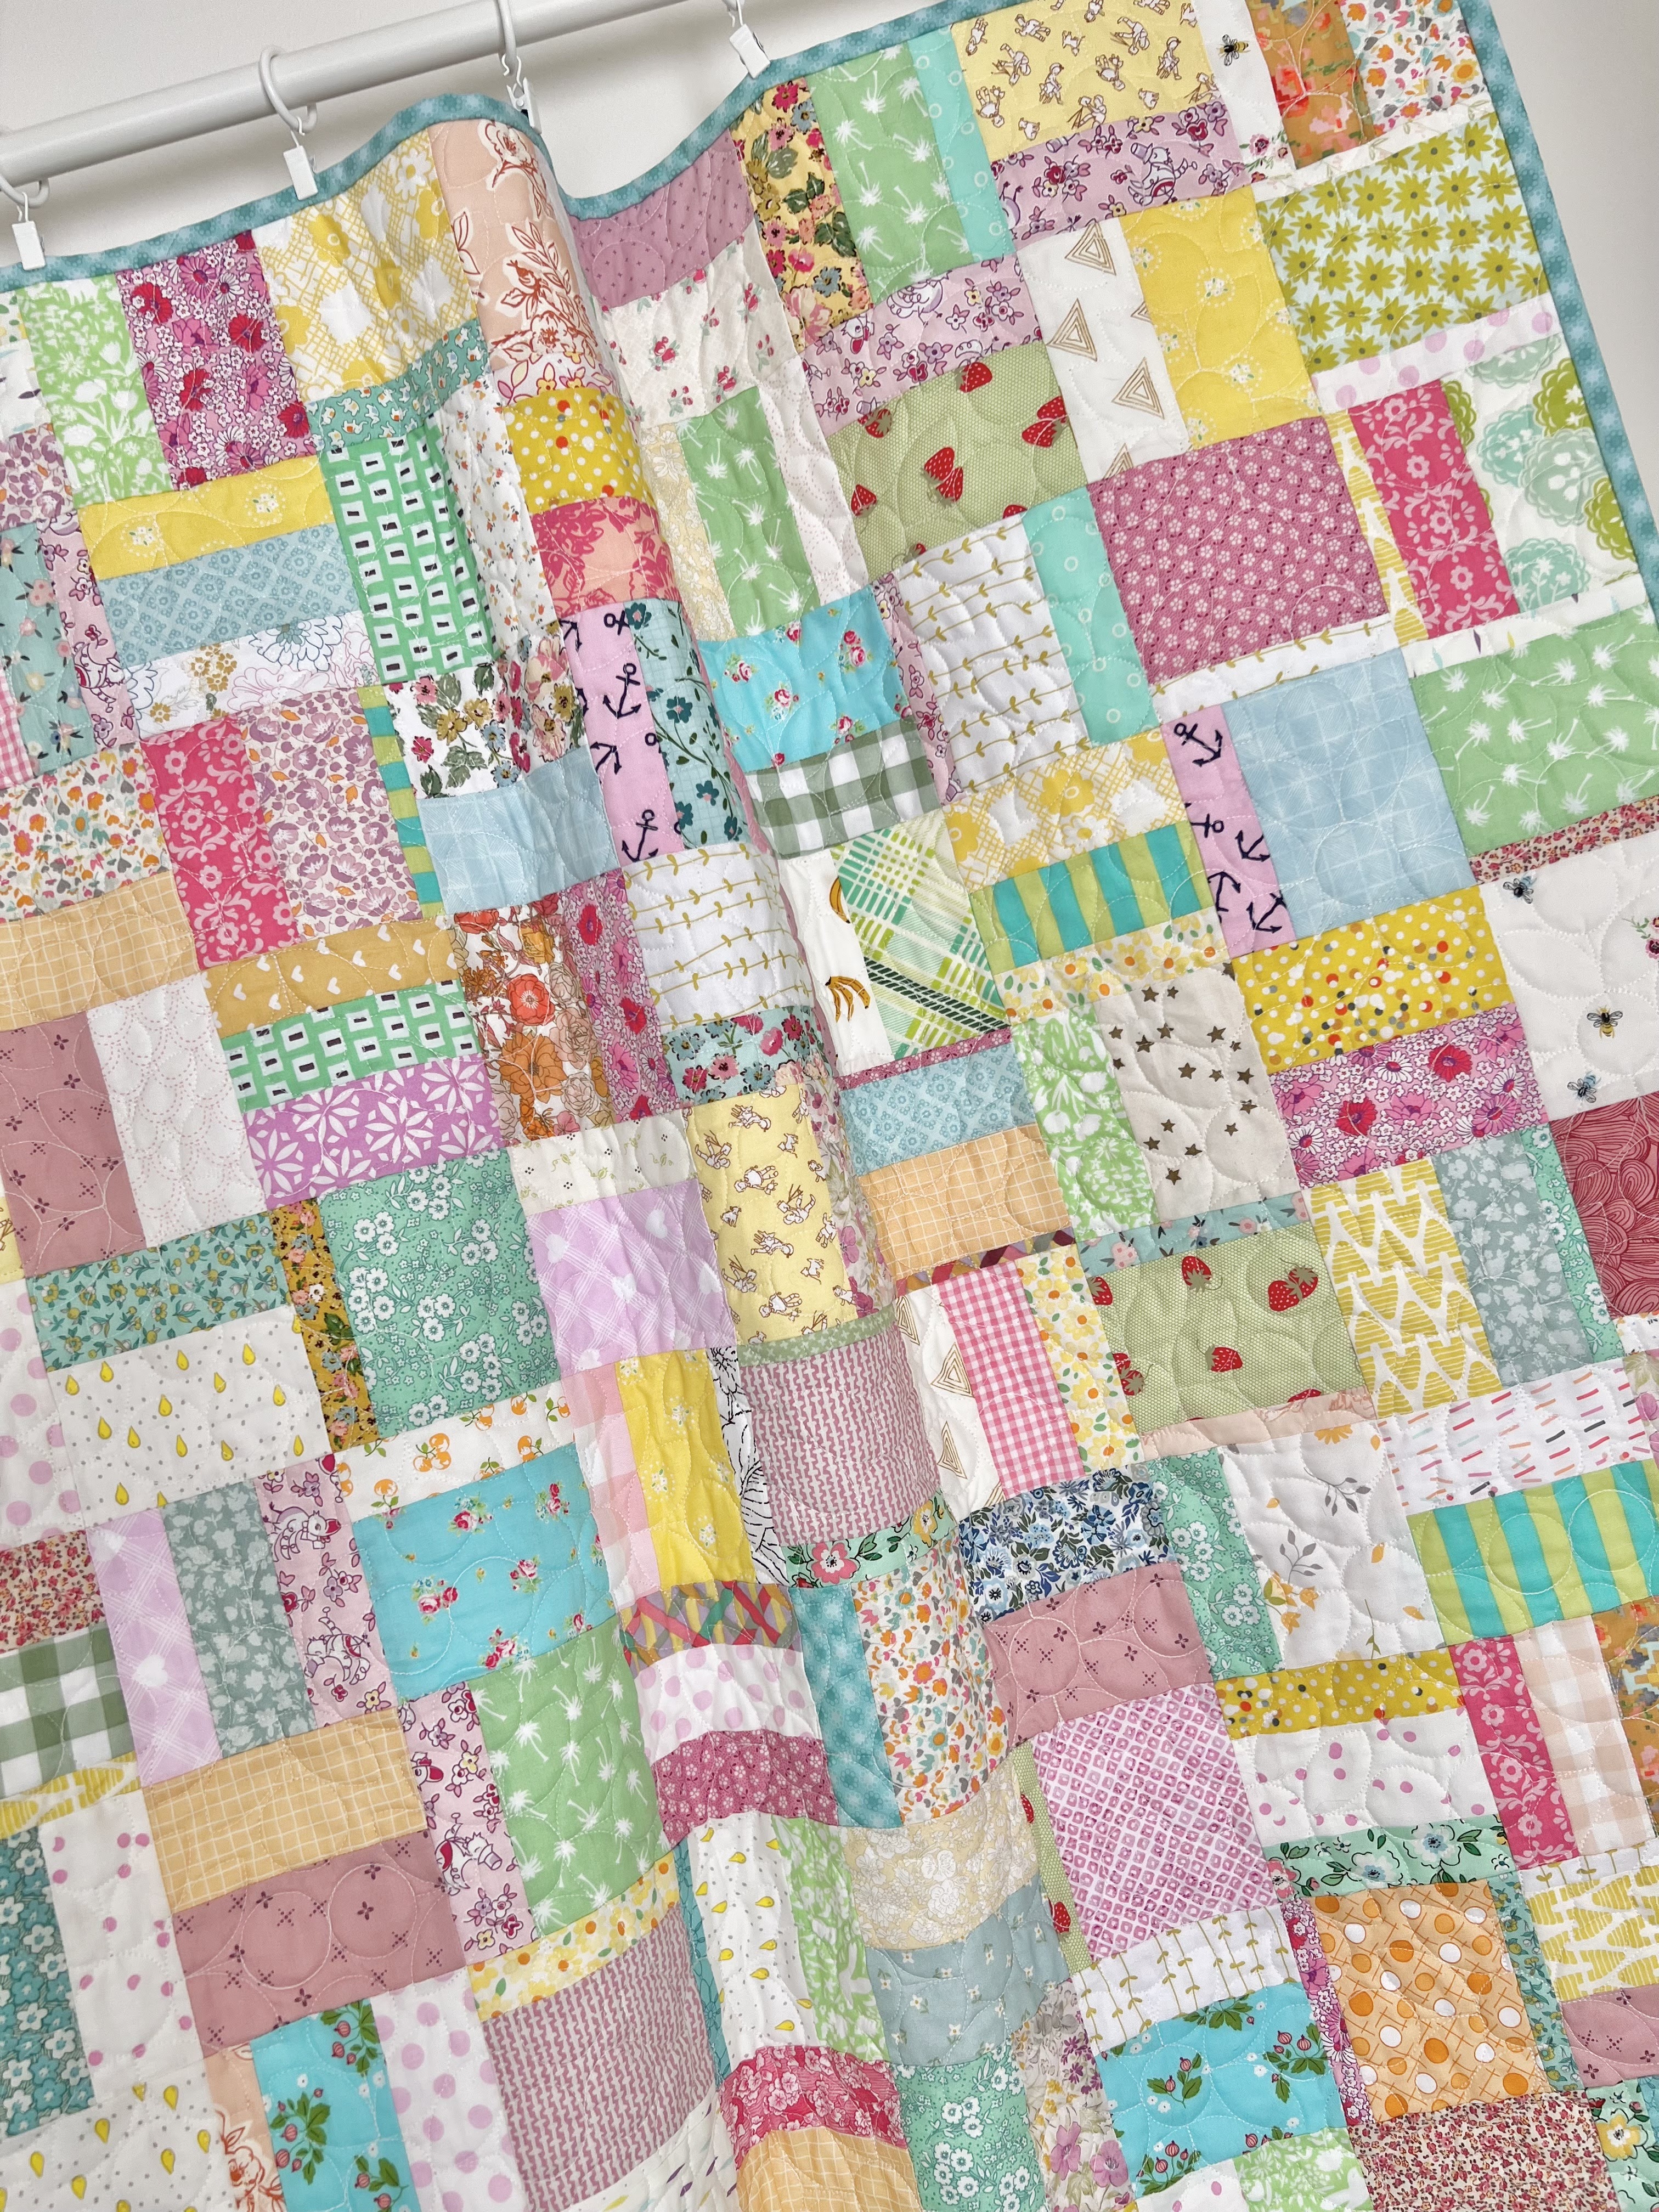 Precut Parade: Quilts to Make from Strips, Squares, and Fat Quarters